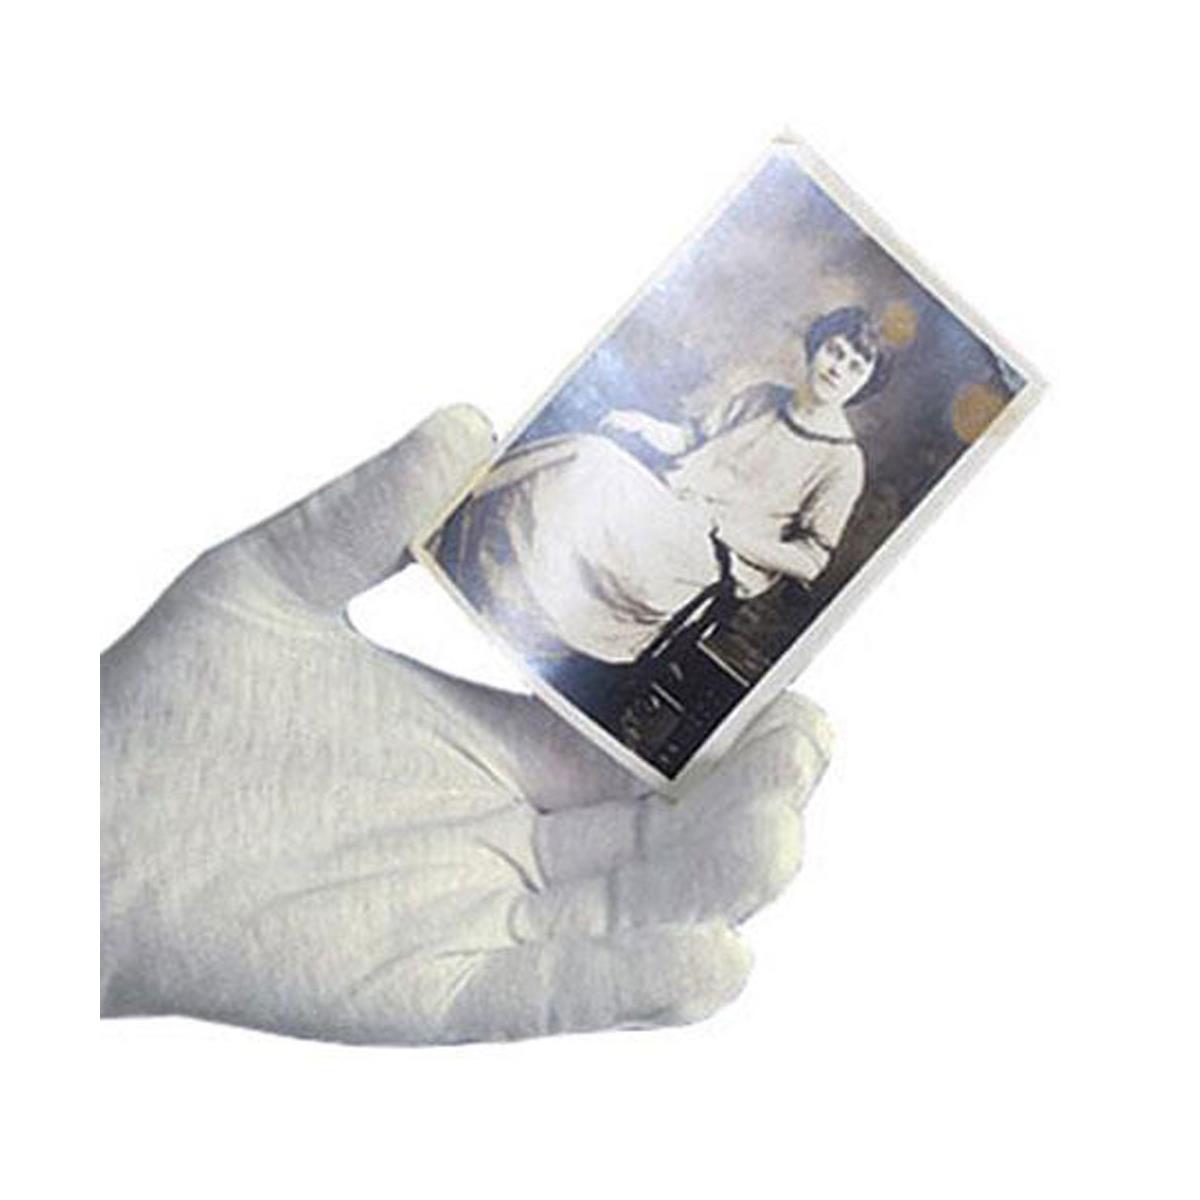 Image of Archival Methods White Cotton Gloves Small